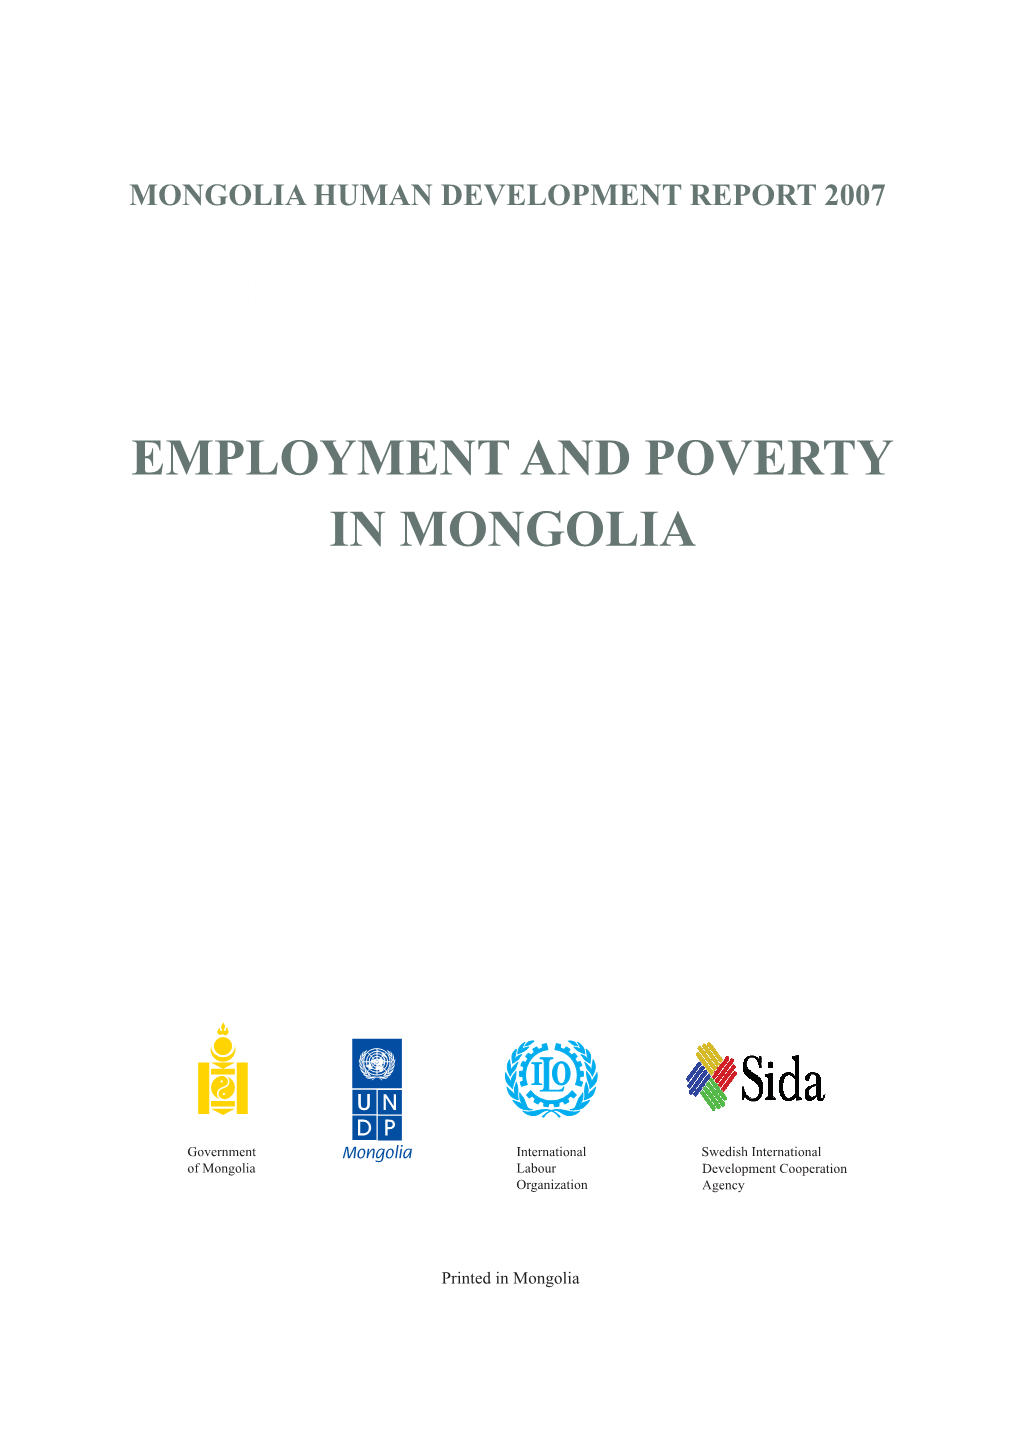 Employment and Poverty in Mongolia Summary